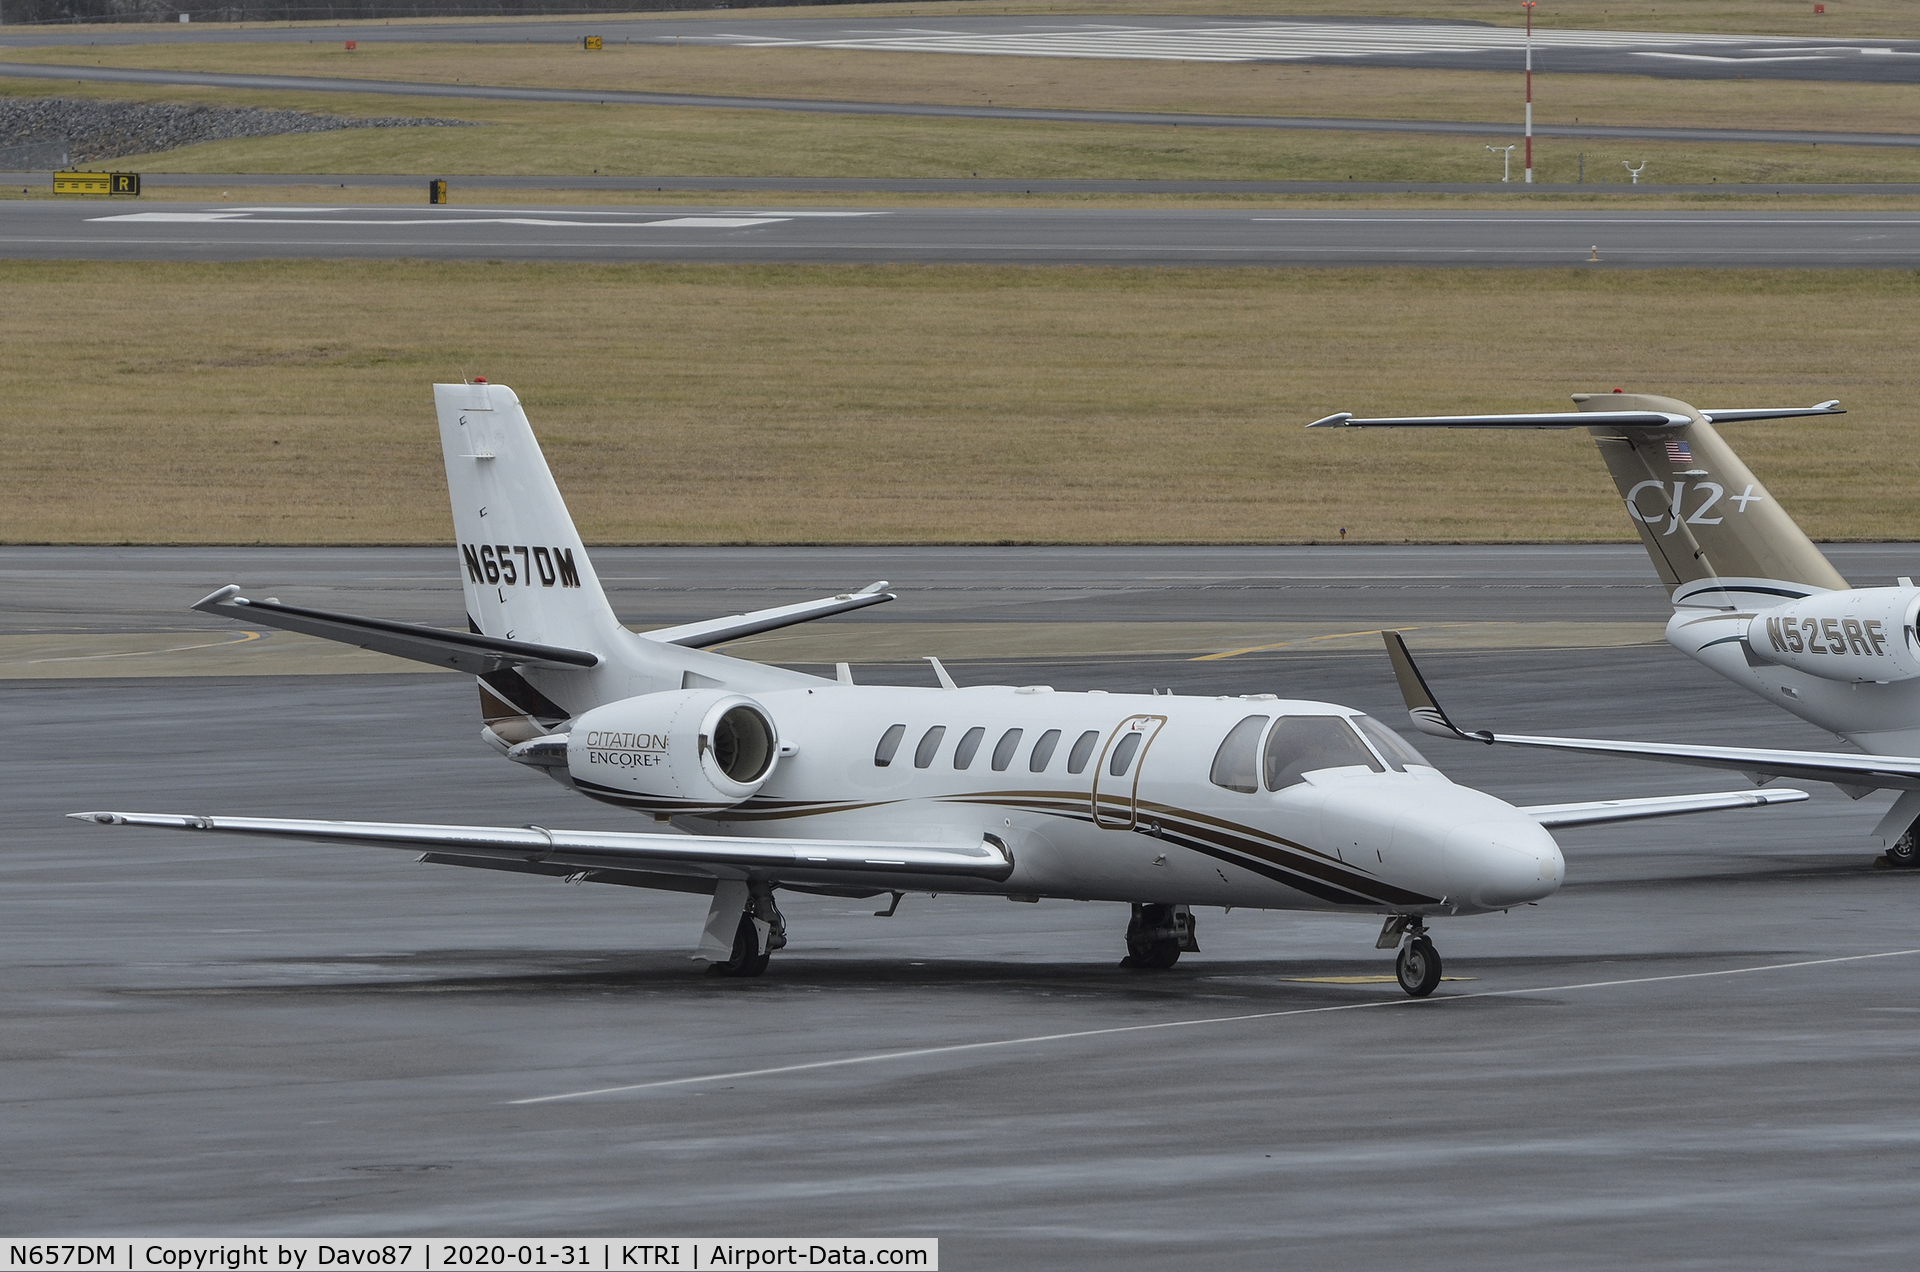 N657DM, 2009 Cessna 560 Citation Encore+ C/N 560-0810, Parked at Tri-Cities Airport (KTRI) in East Tennessee.